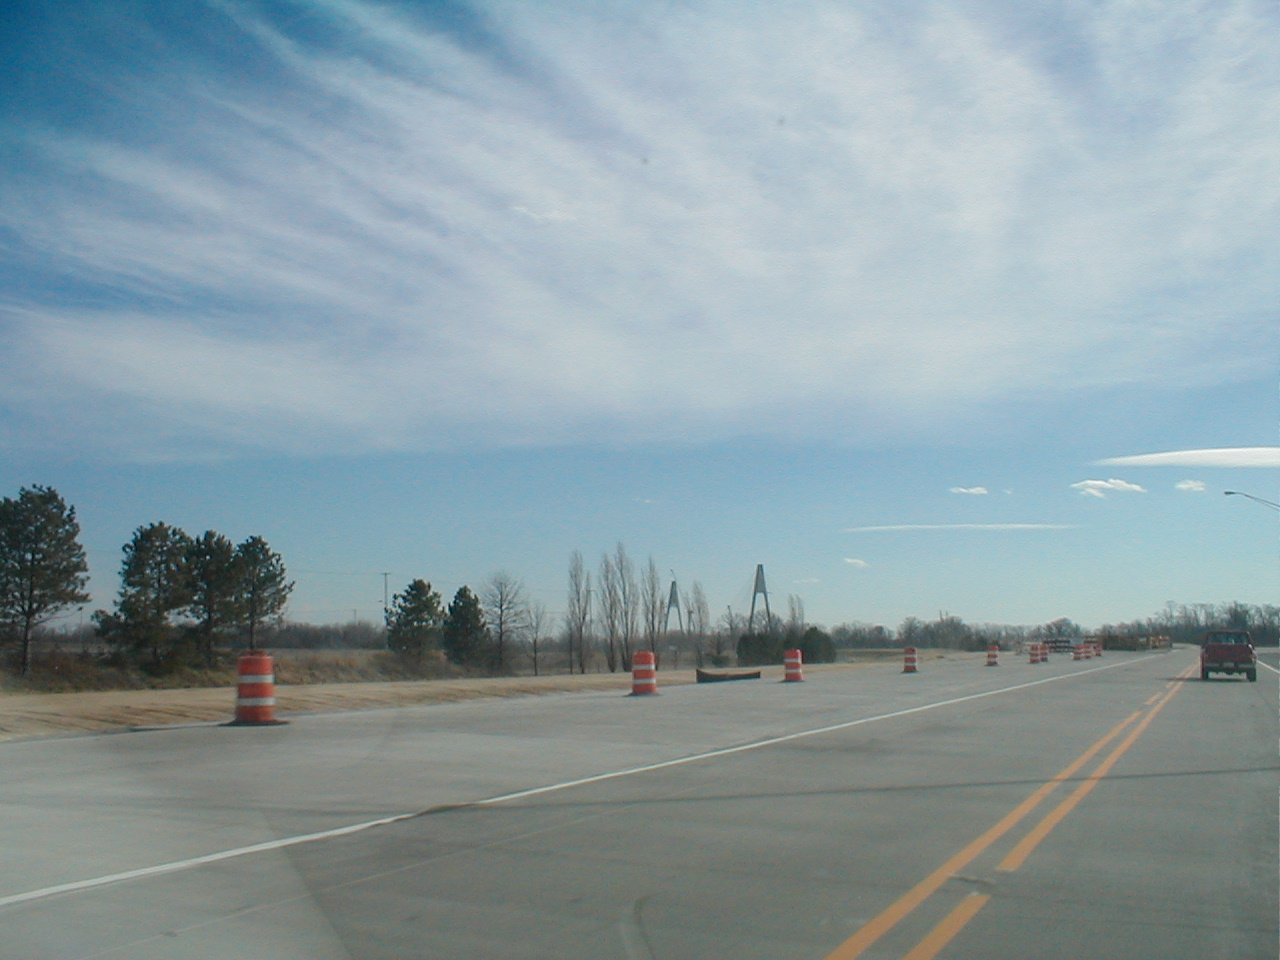 The bridge viewed from US 231 South in Indiana.